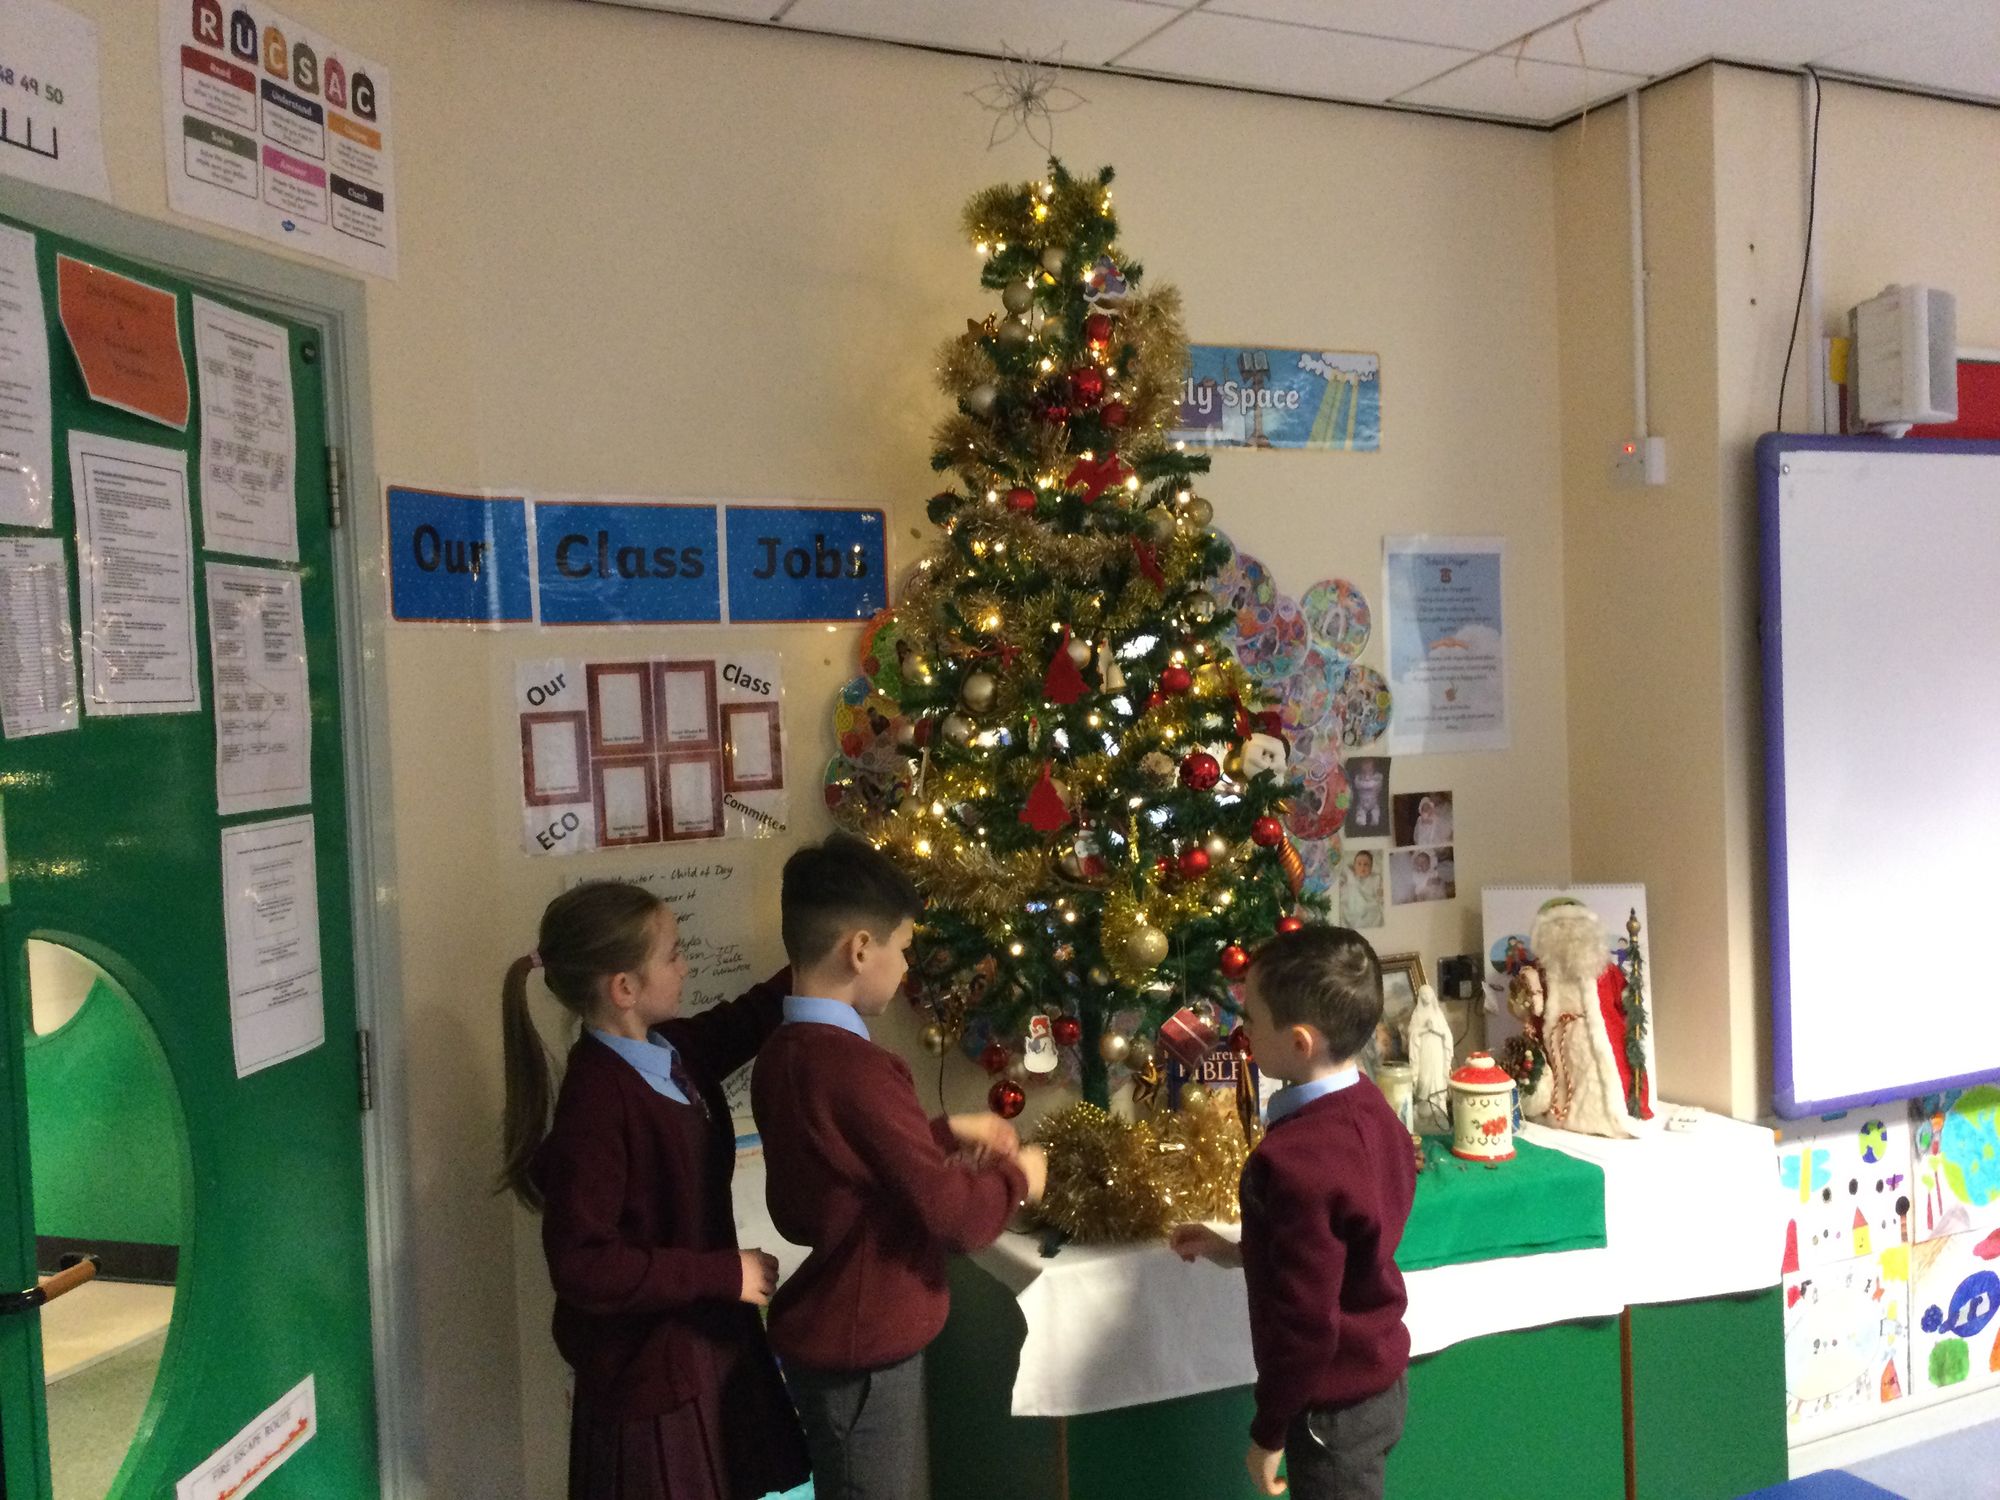 Year 4B decorating our classroom and shared area.